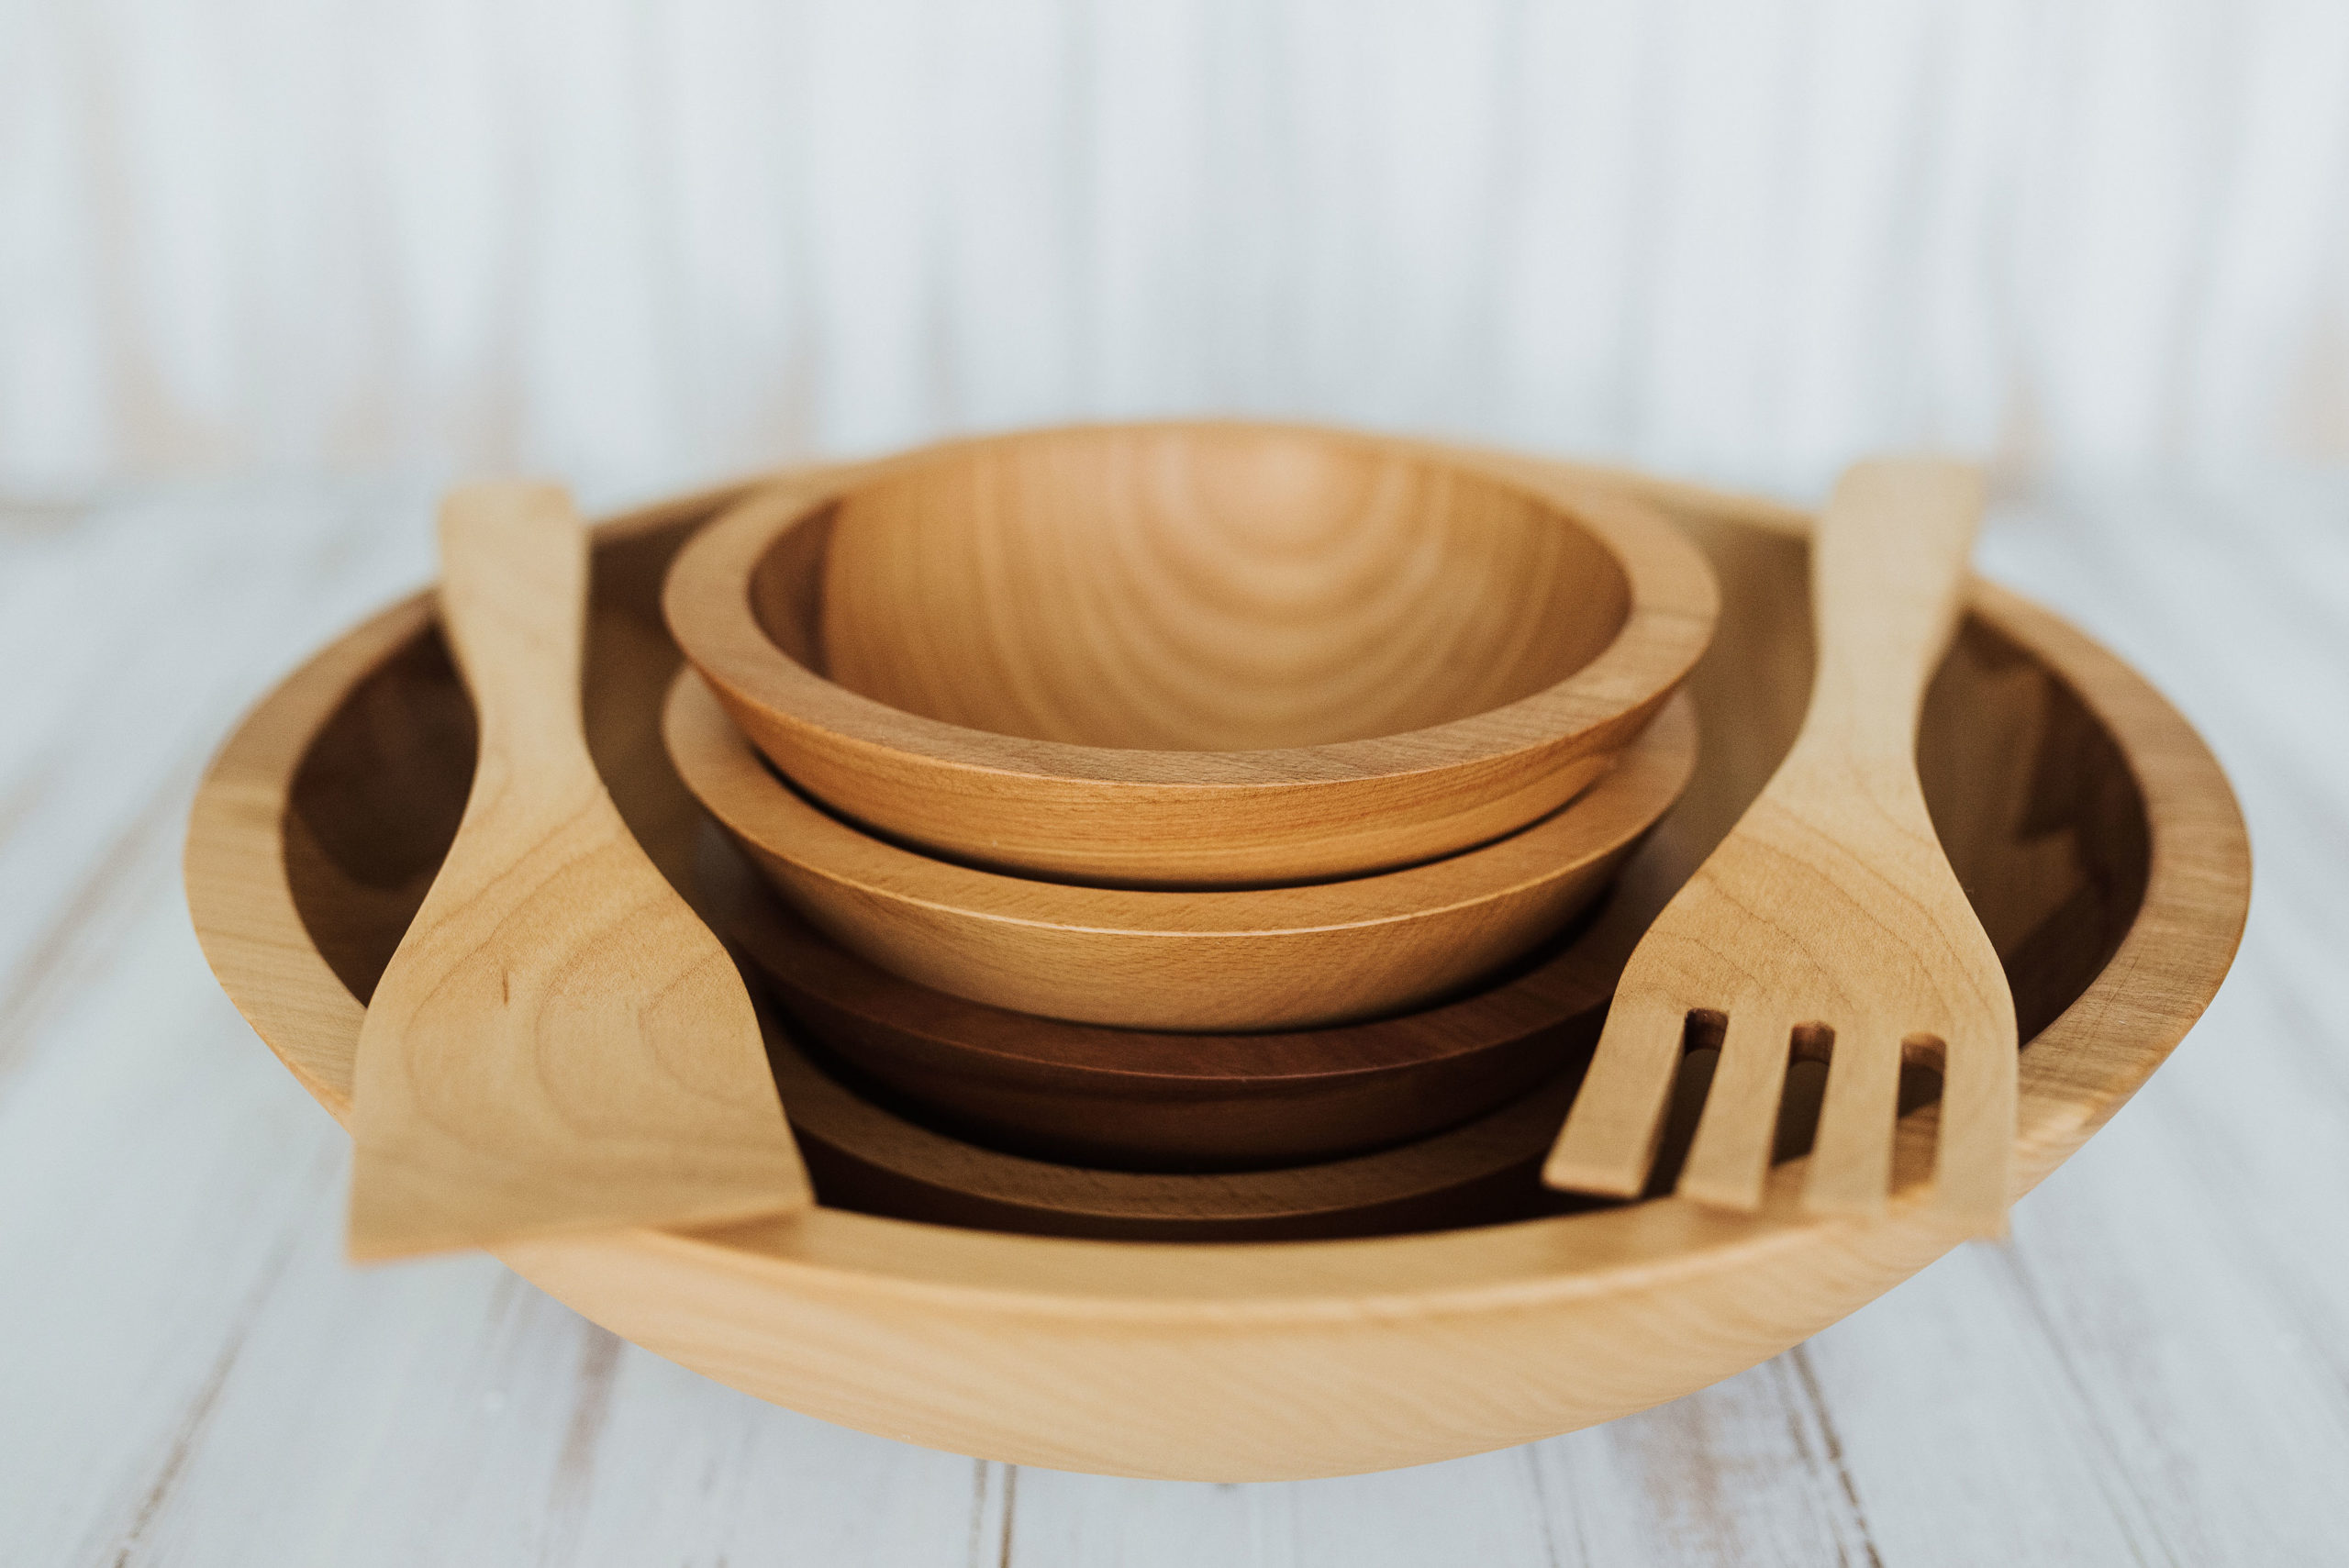 Large Wooden Salad Bowl  15 Maple Bowl Set With Bee's Oil Finish